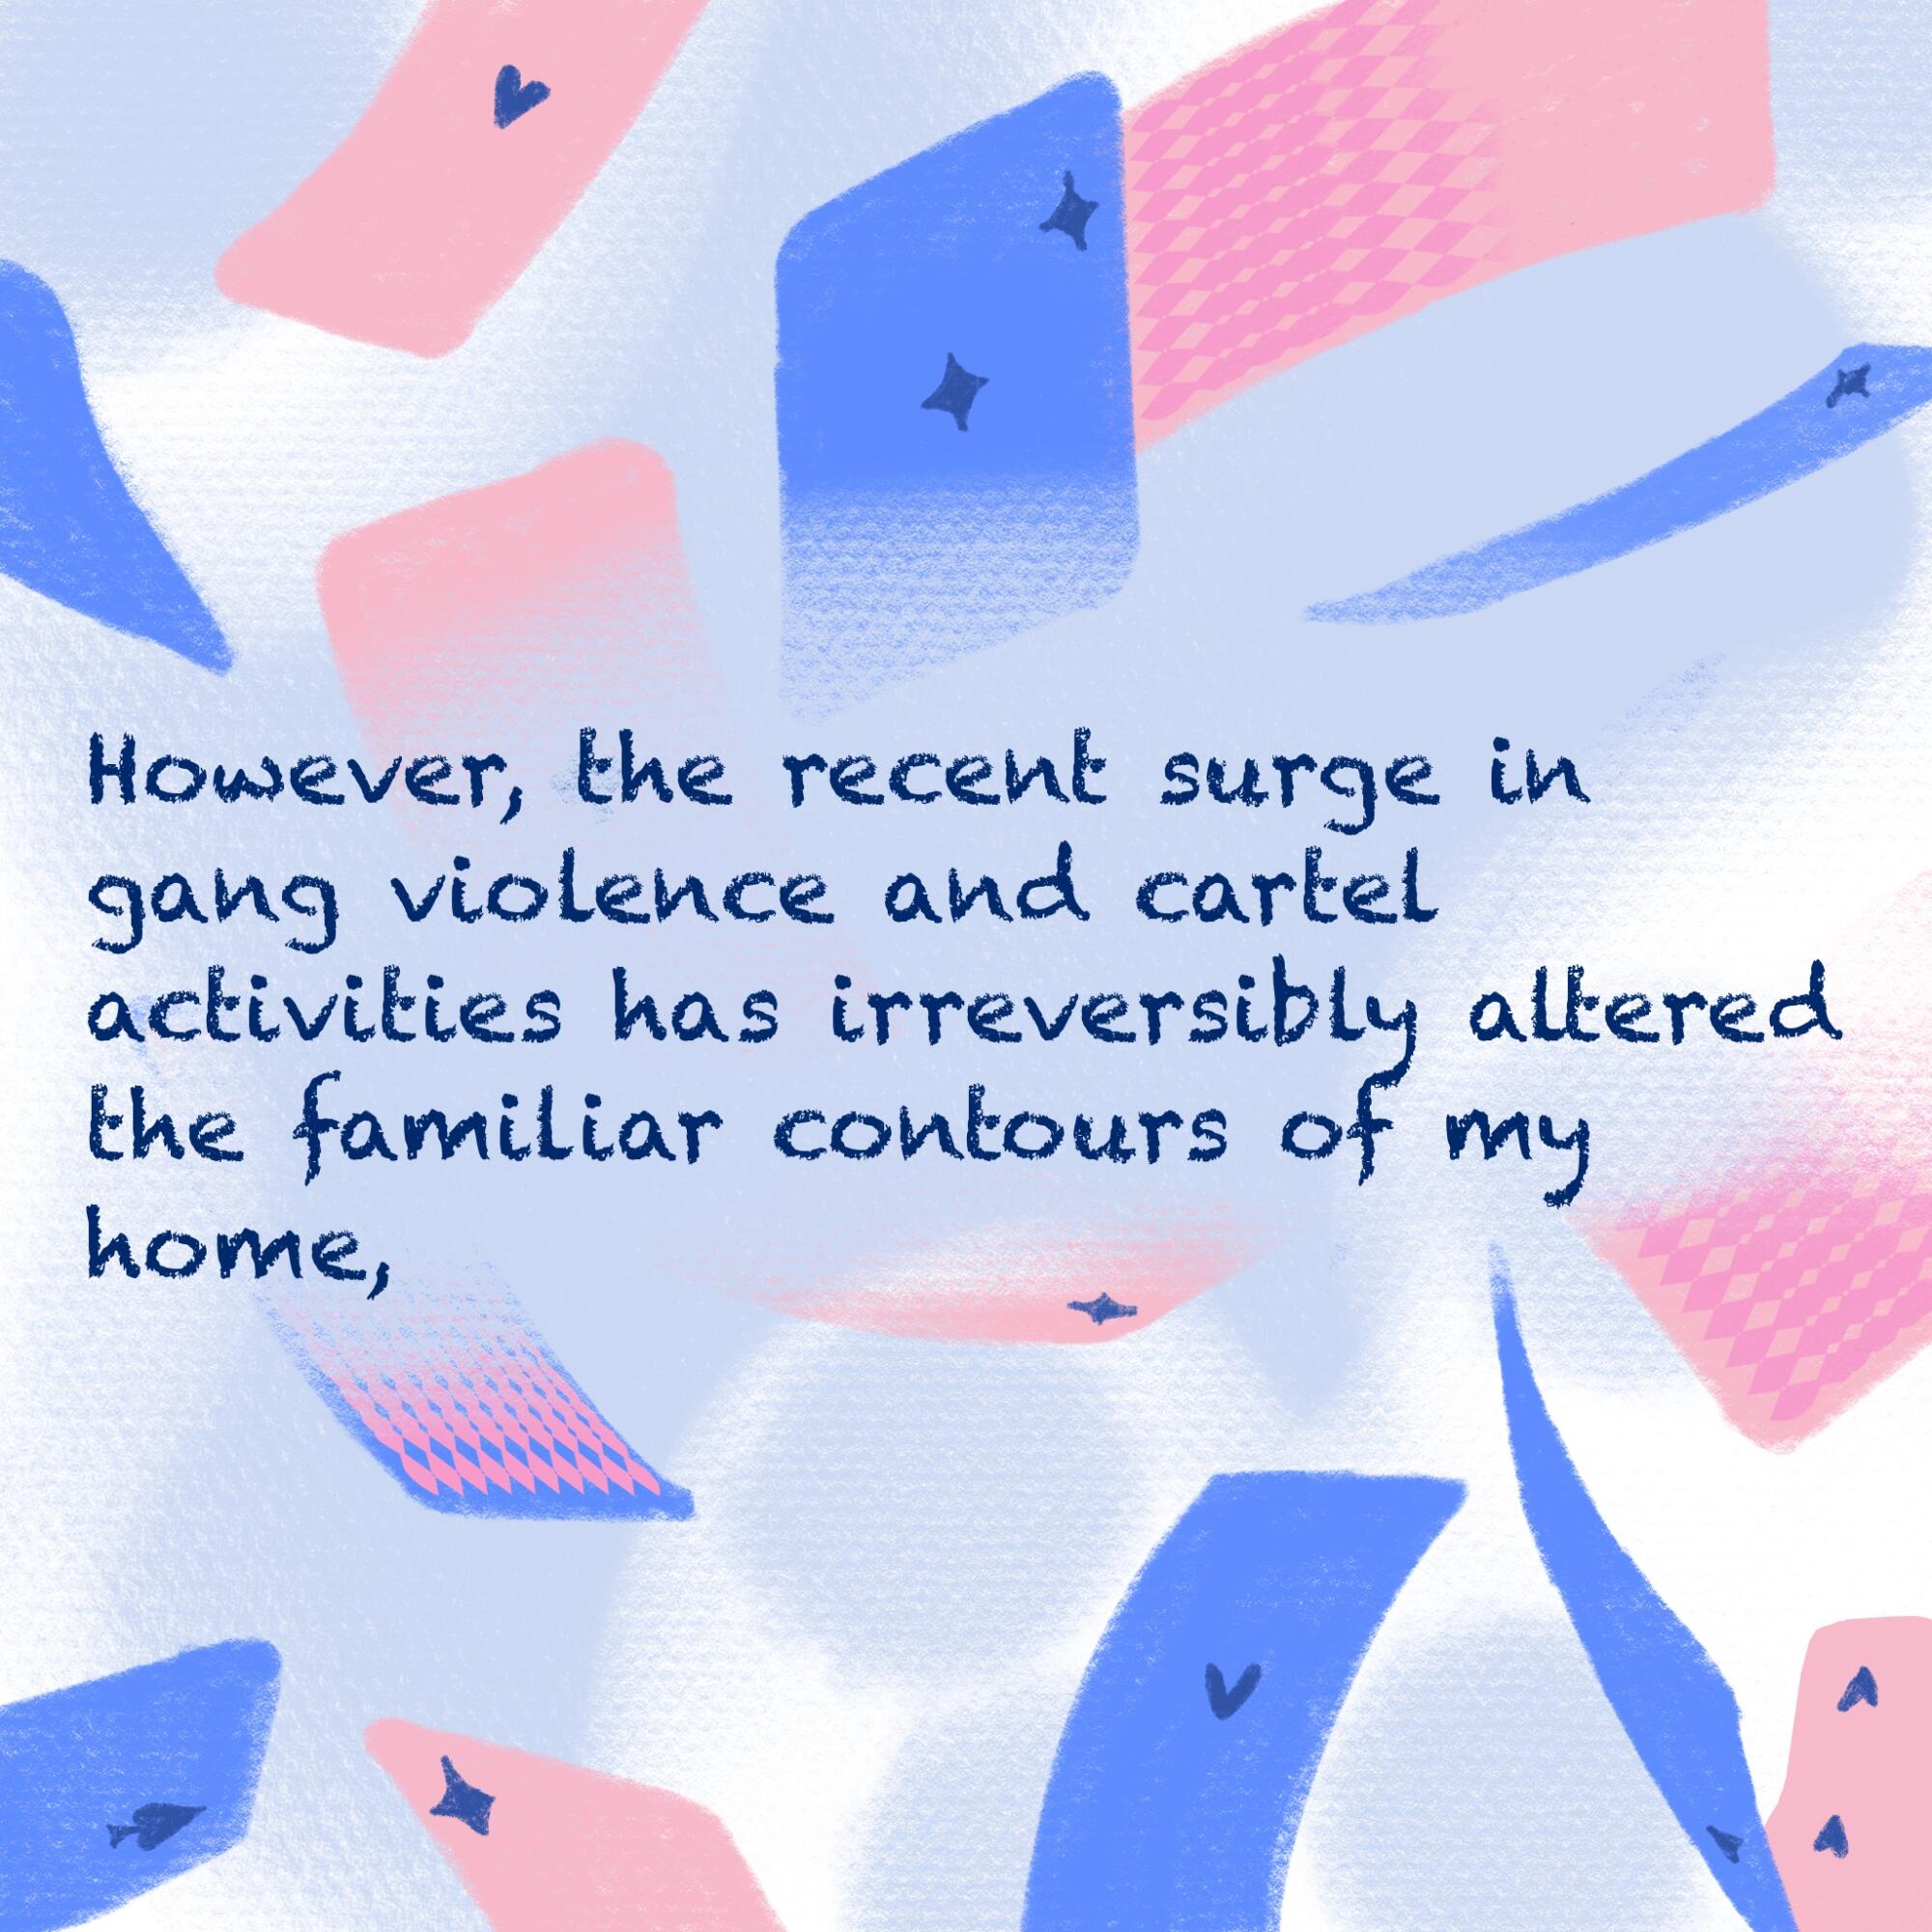 However, the recent surge in violence has irreversibly altered the contours of my home